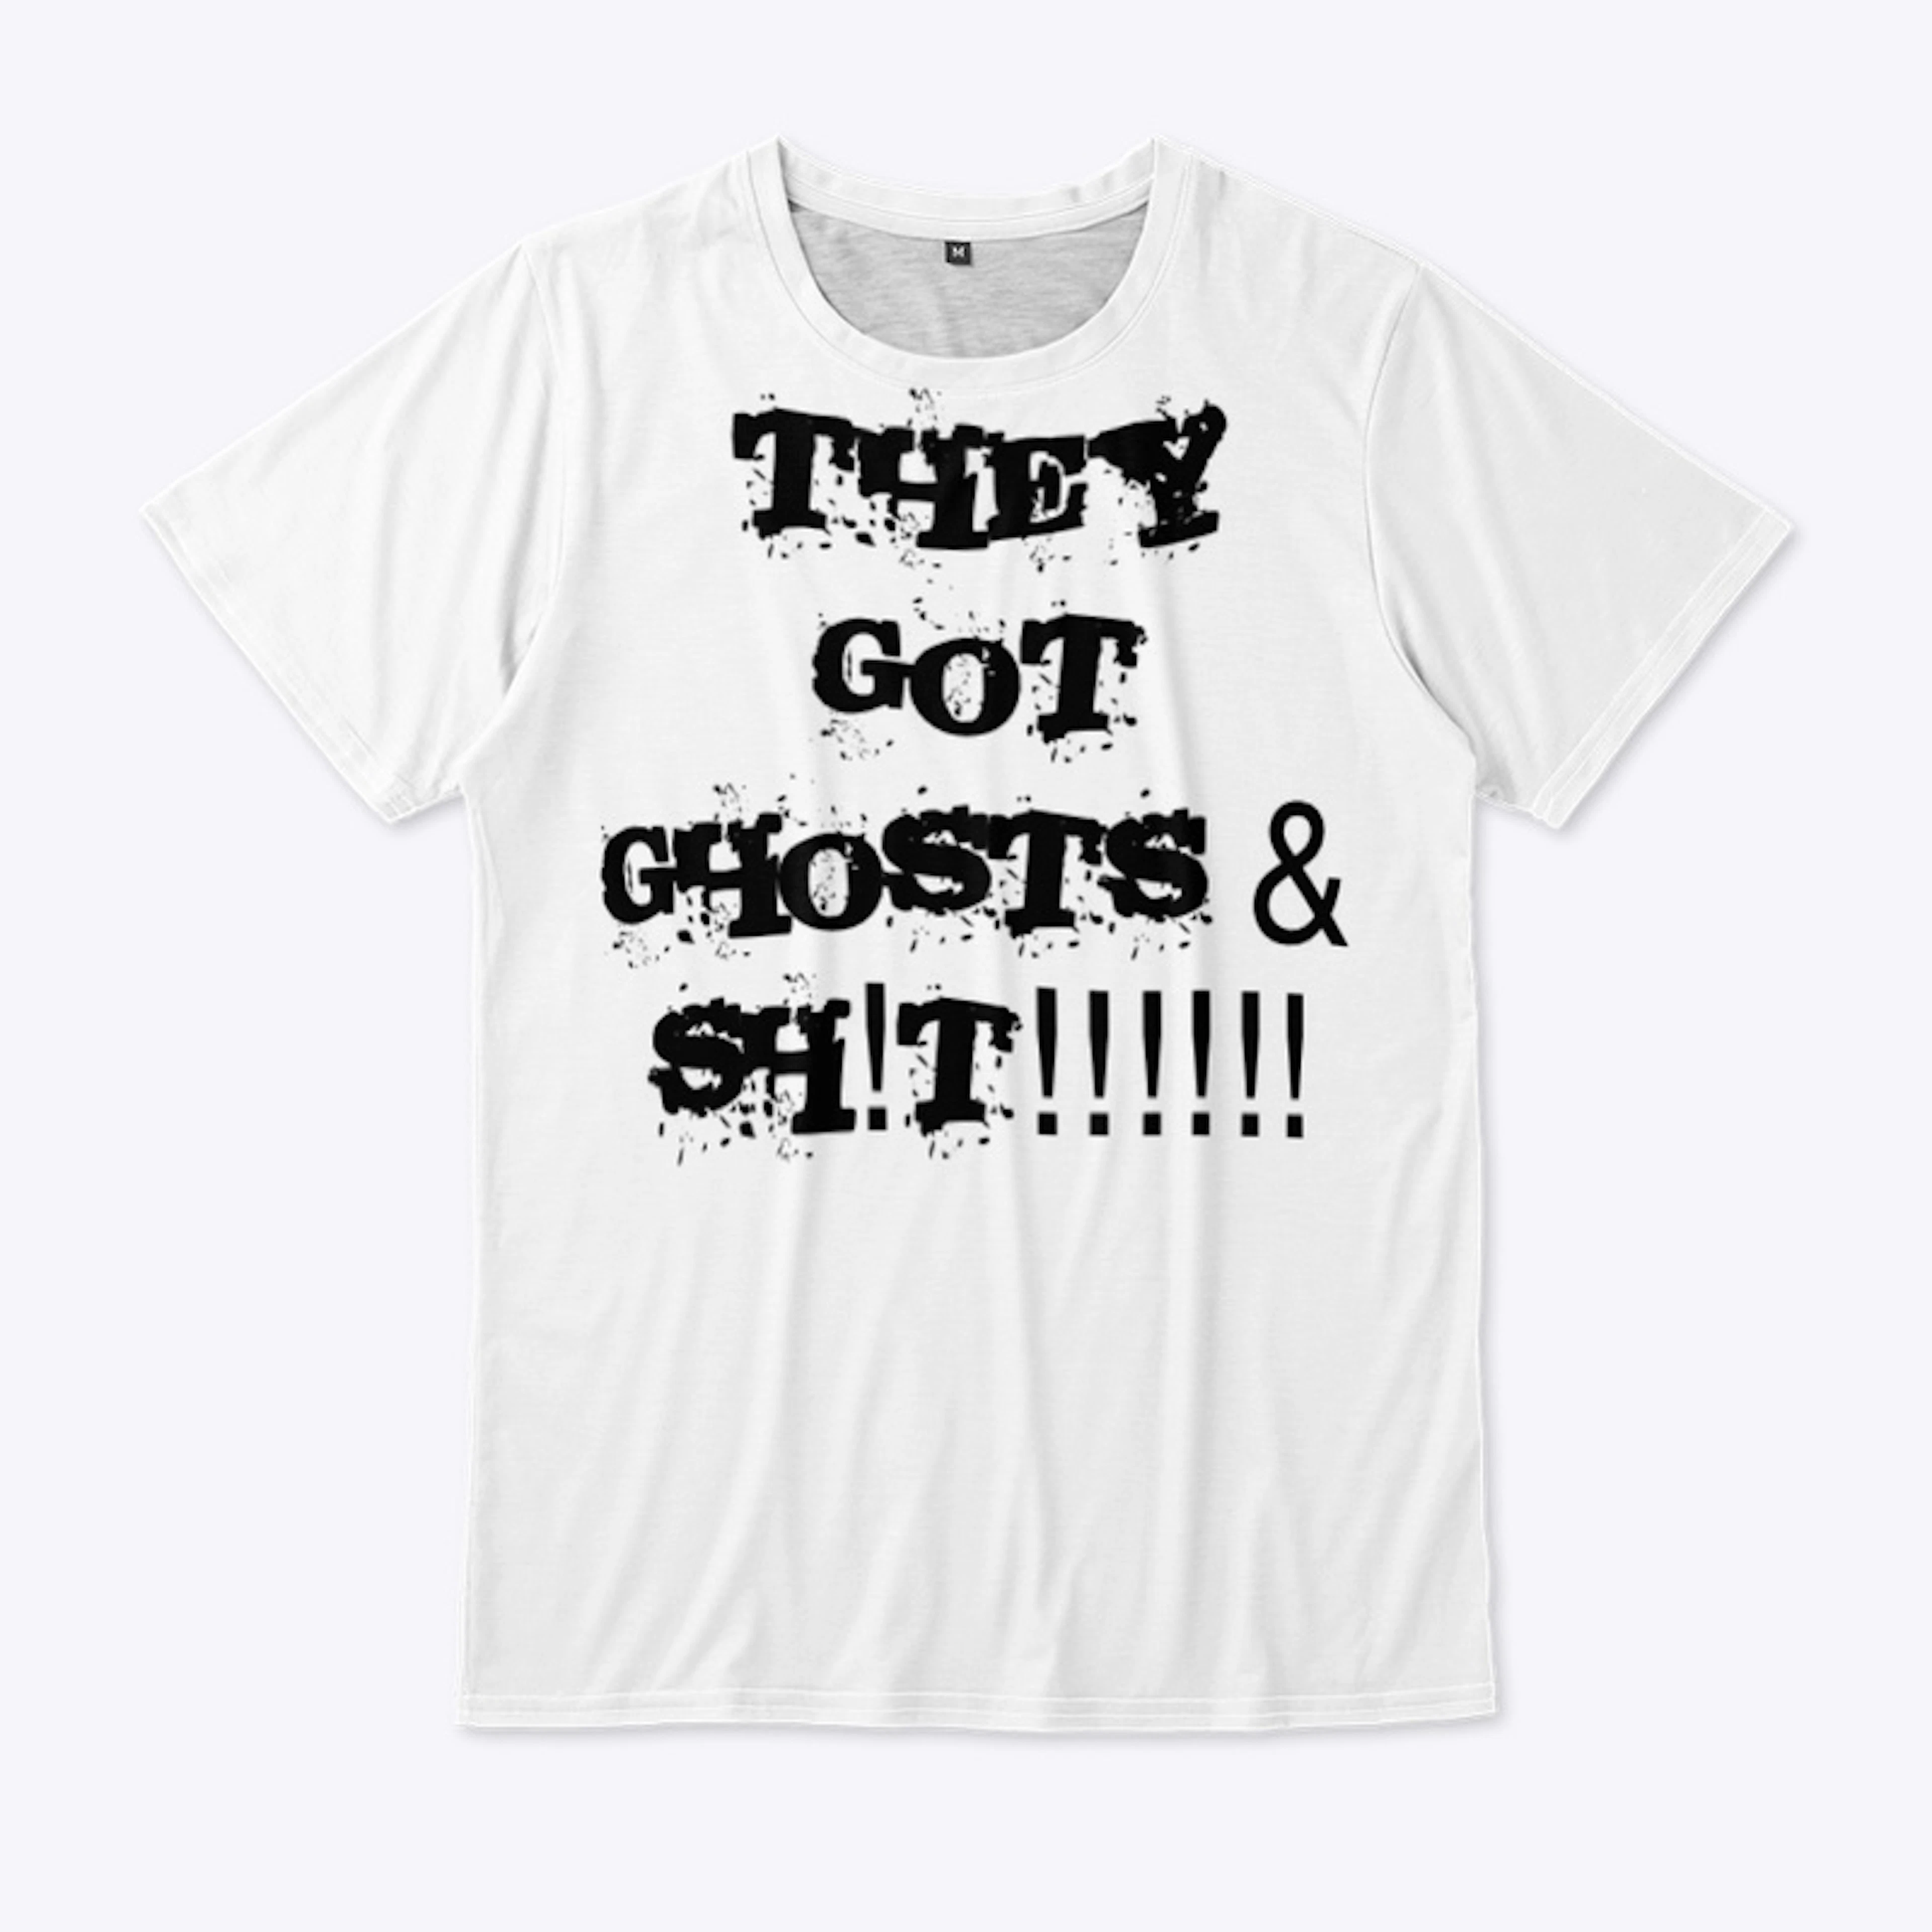 THEY GOT GHOSTS & SH!T!!!! Tee